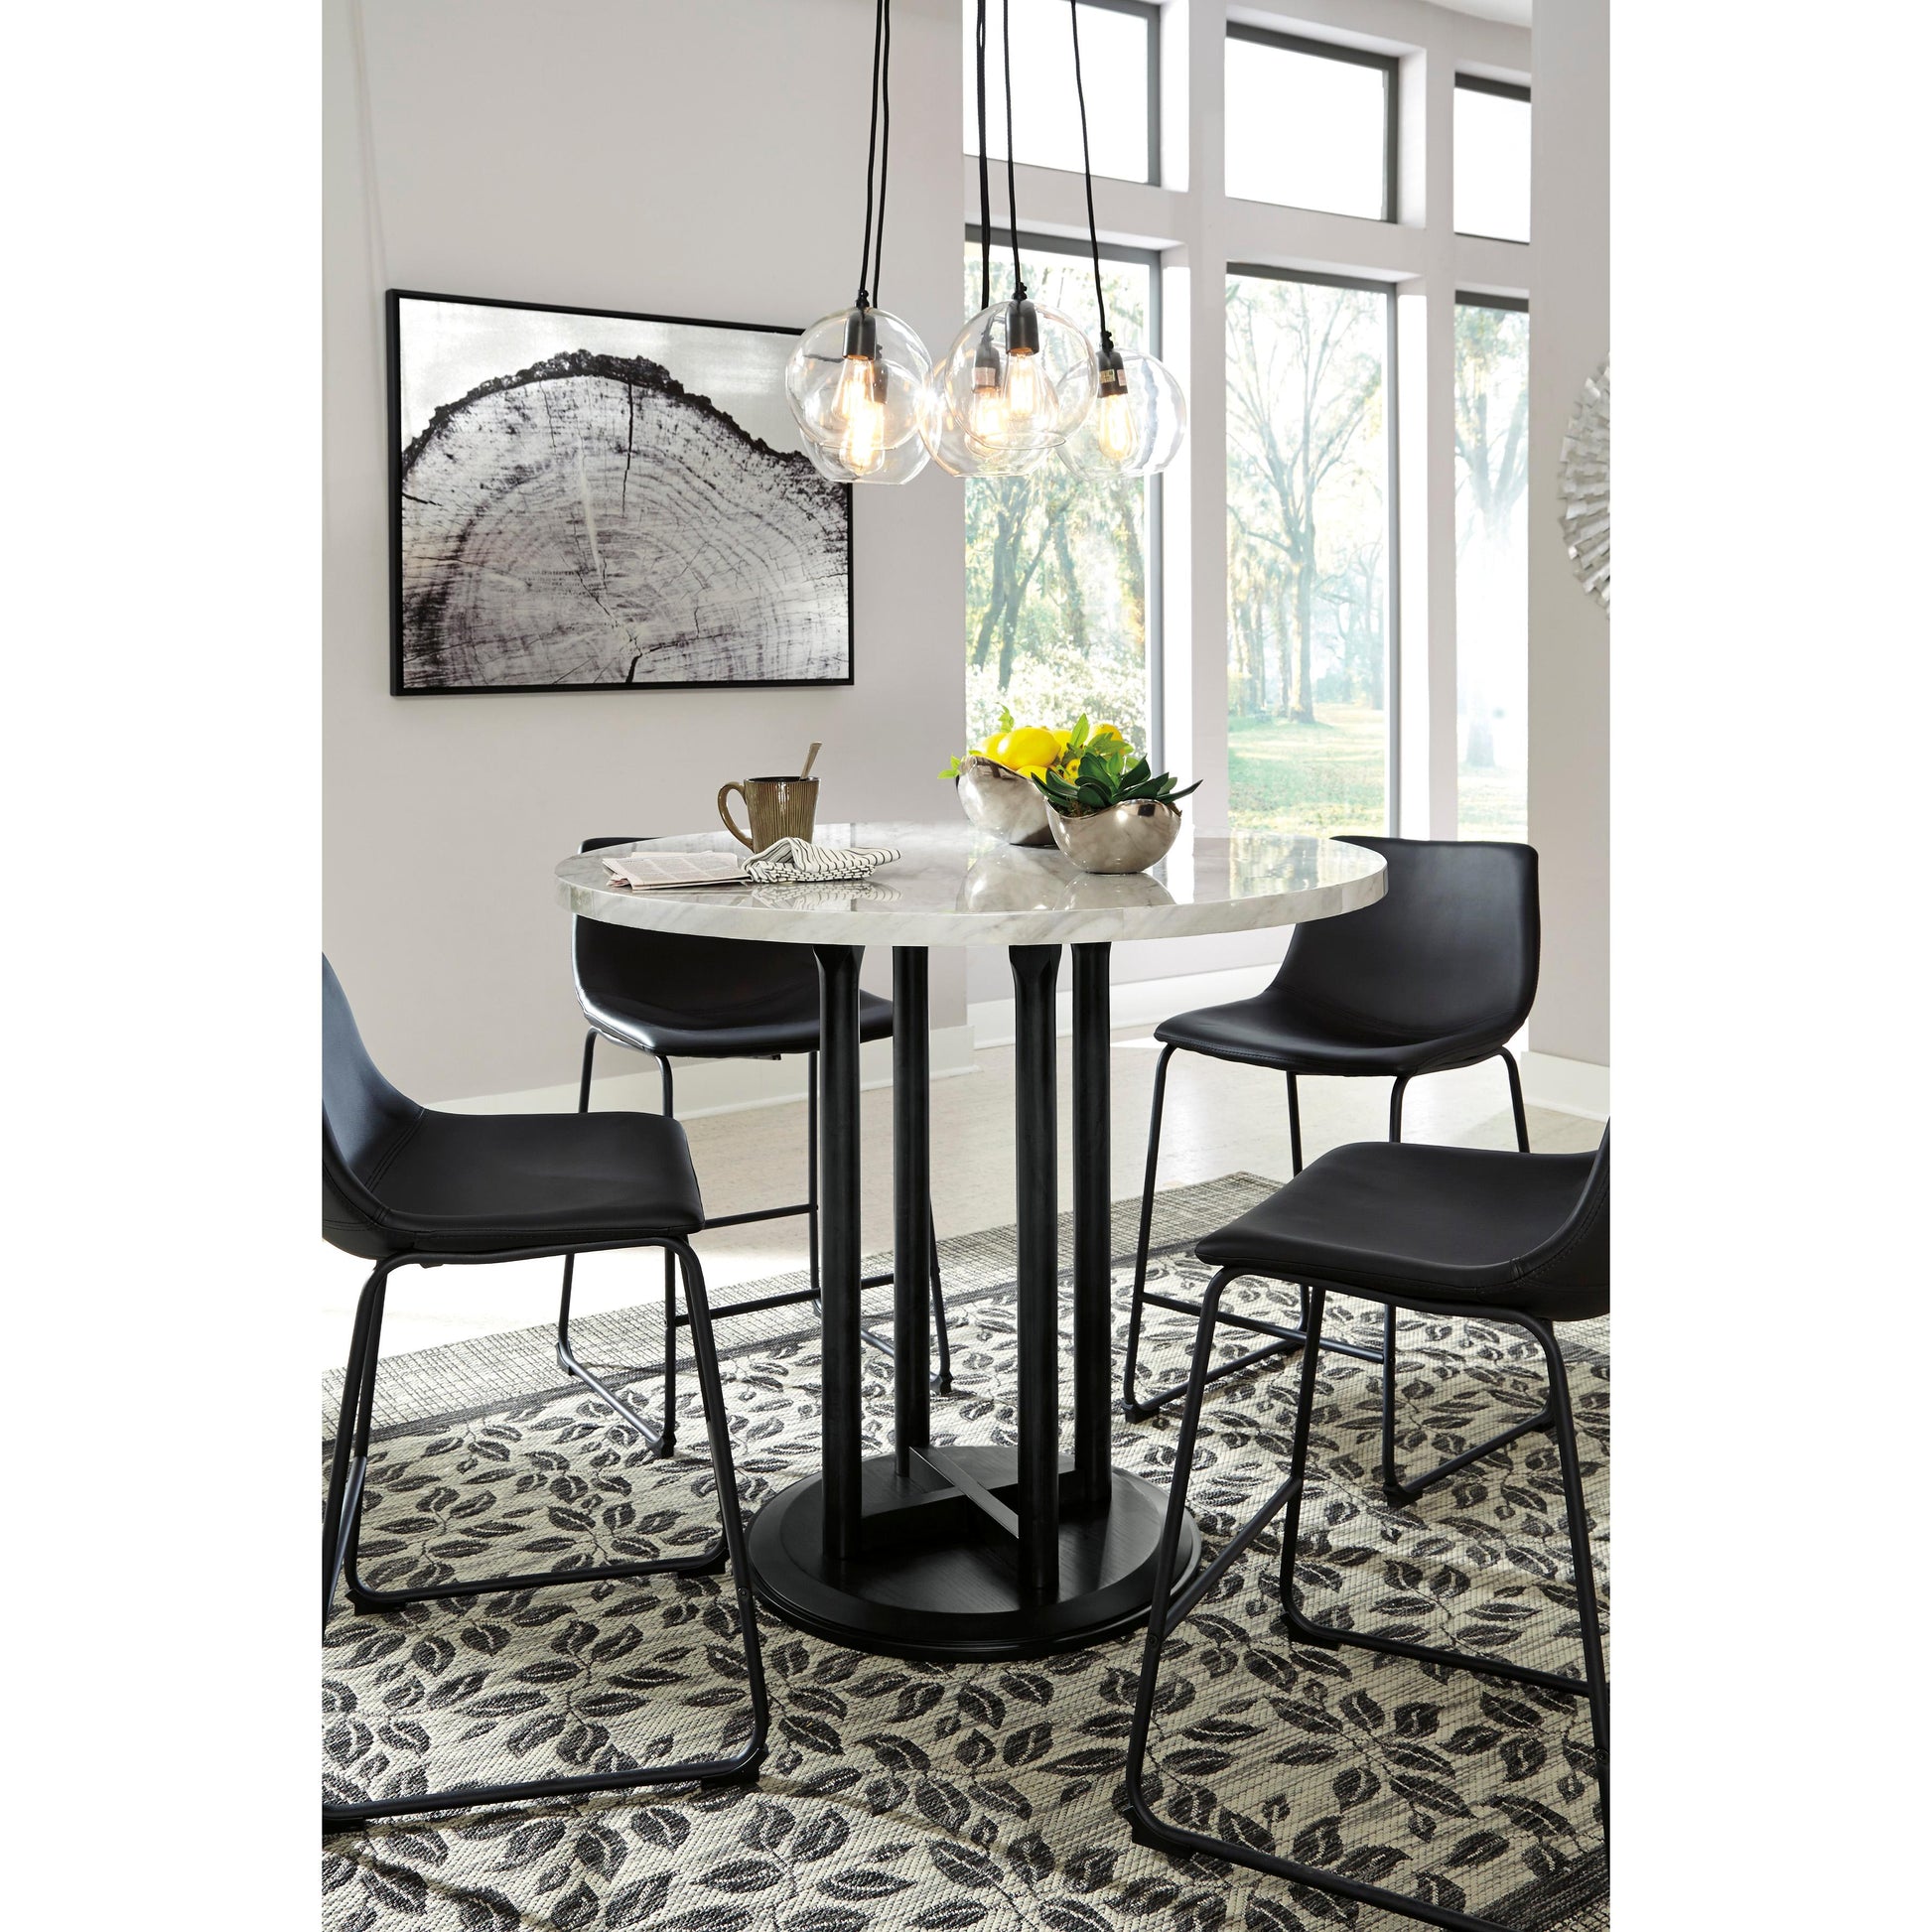 Signature Design by Ashley Round Centiar Counter Height Dining Table with Marble Top and Pedestal Base D372-23